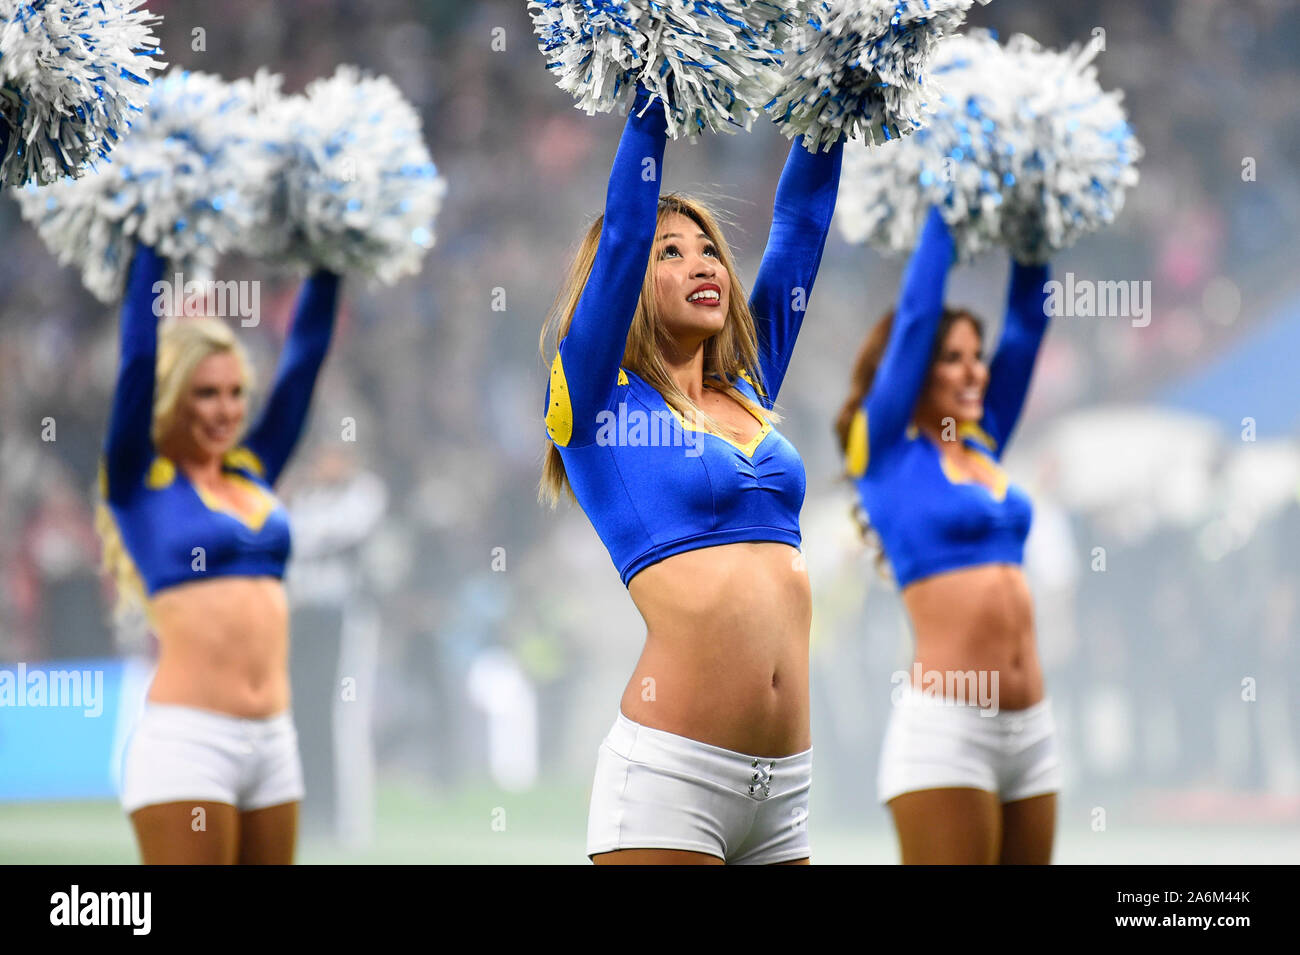 London, UK.  27 October 2019.  Rams cheerleaders ahead of the NFL match Cincinnati Bengals v Los Angeles Rams at Wembley Stadium, game 3 of this year's NFL London Games.  Credit: Stephen Chung / Alamy Live News Stock Photo